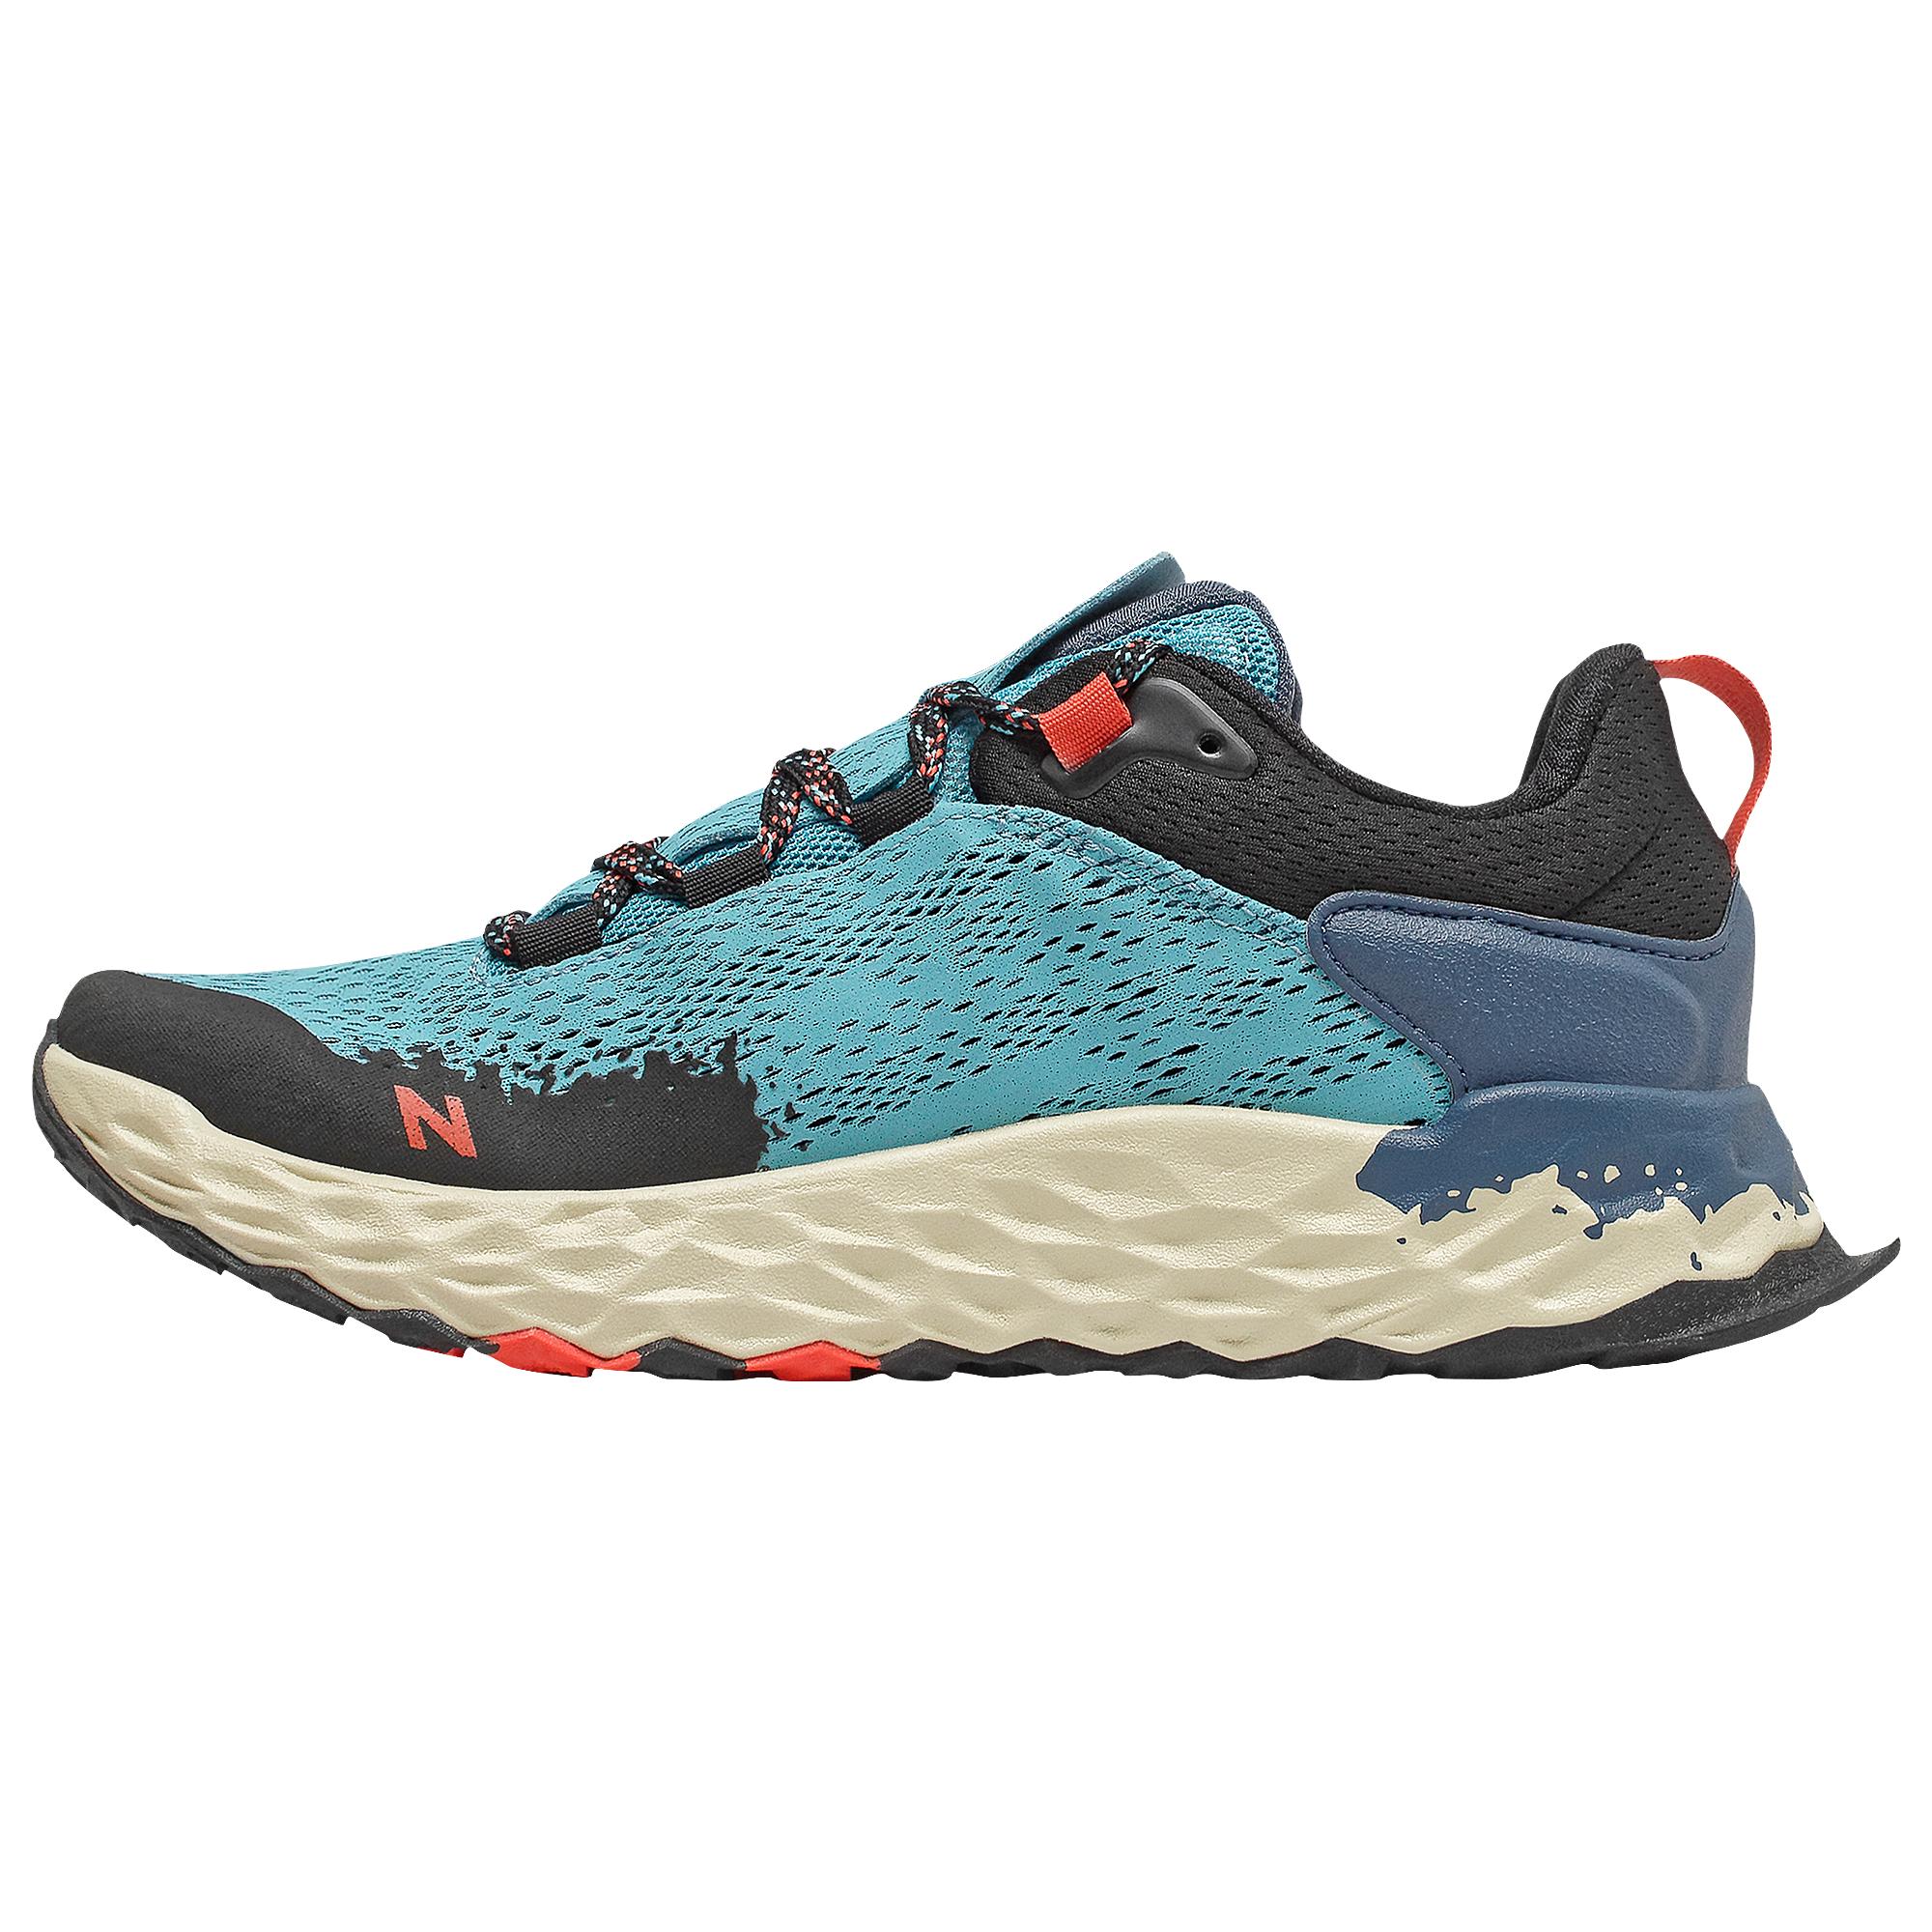 El Corte Ingles Saucony Clearance, 52% OFF | www.naudin.be